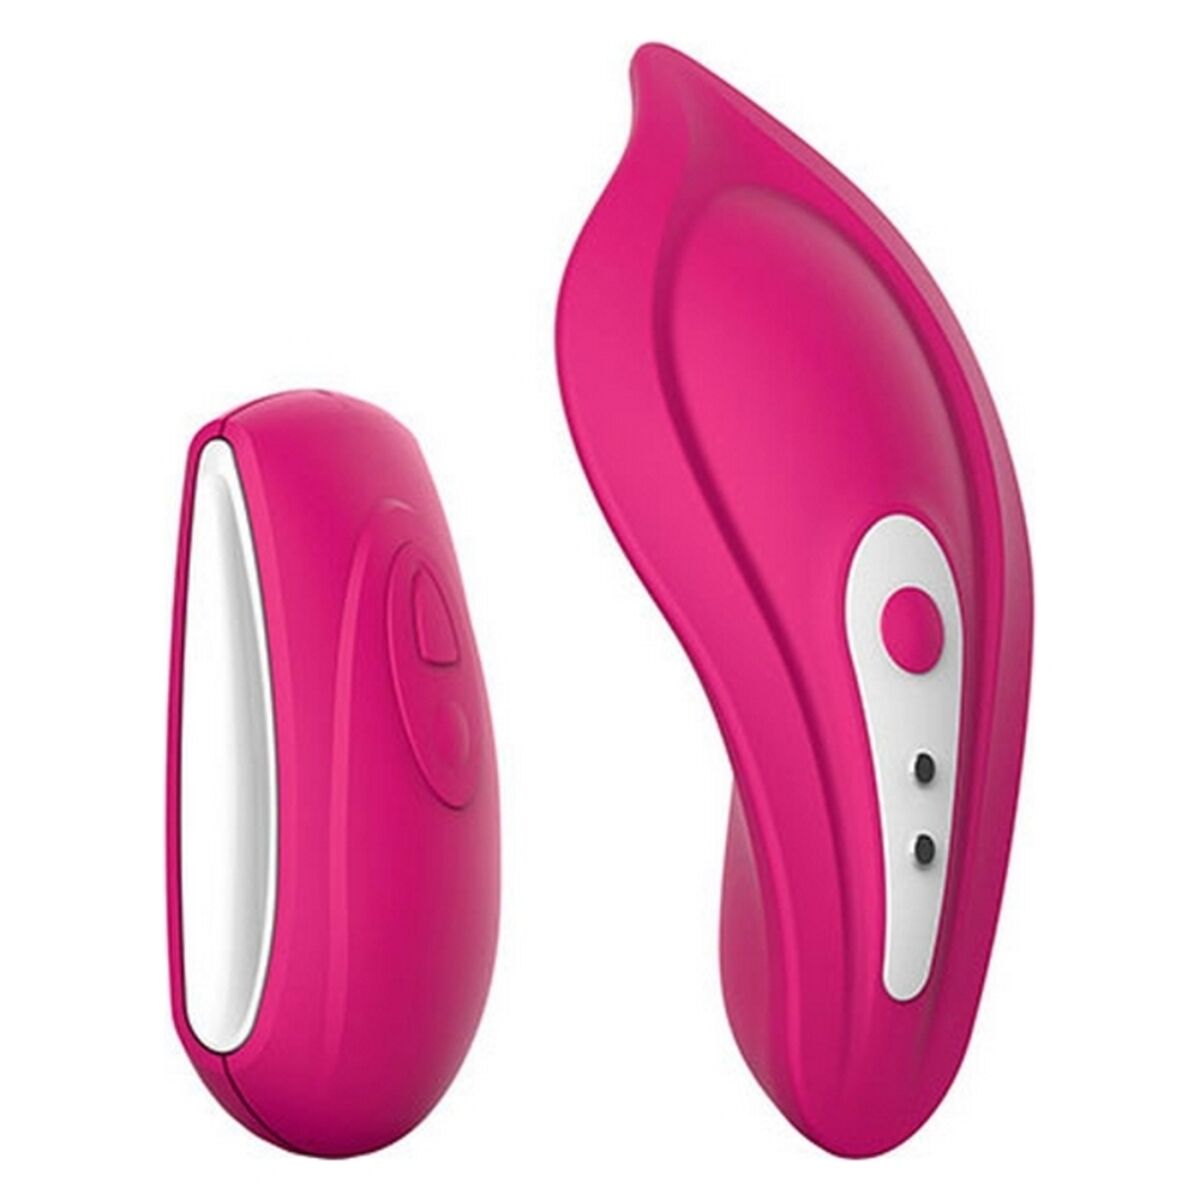 Massager Liebe Panty Kers